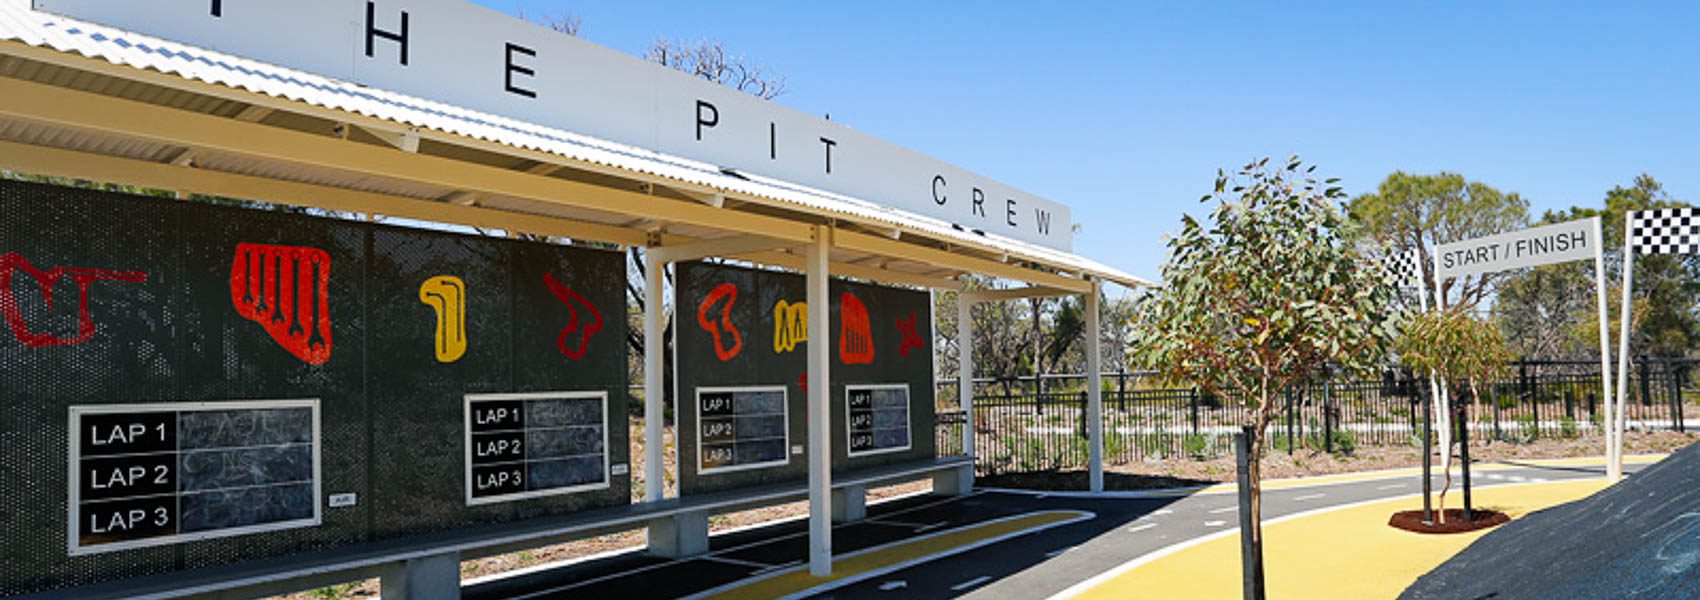 Pitstop Park in Banksia Grove is one of Perth's best parks and playgrounds